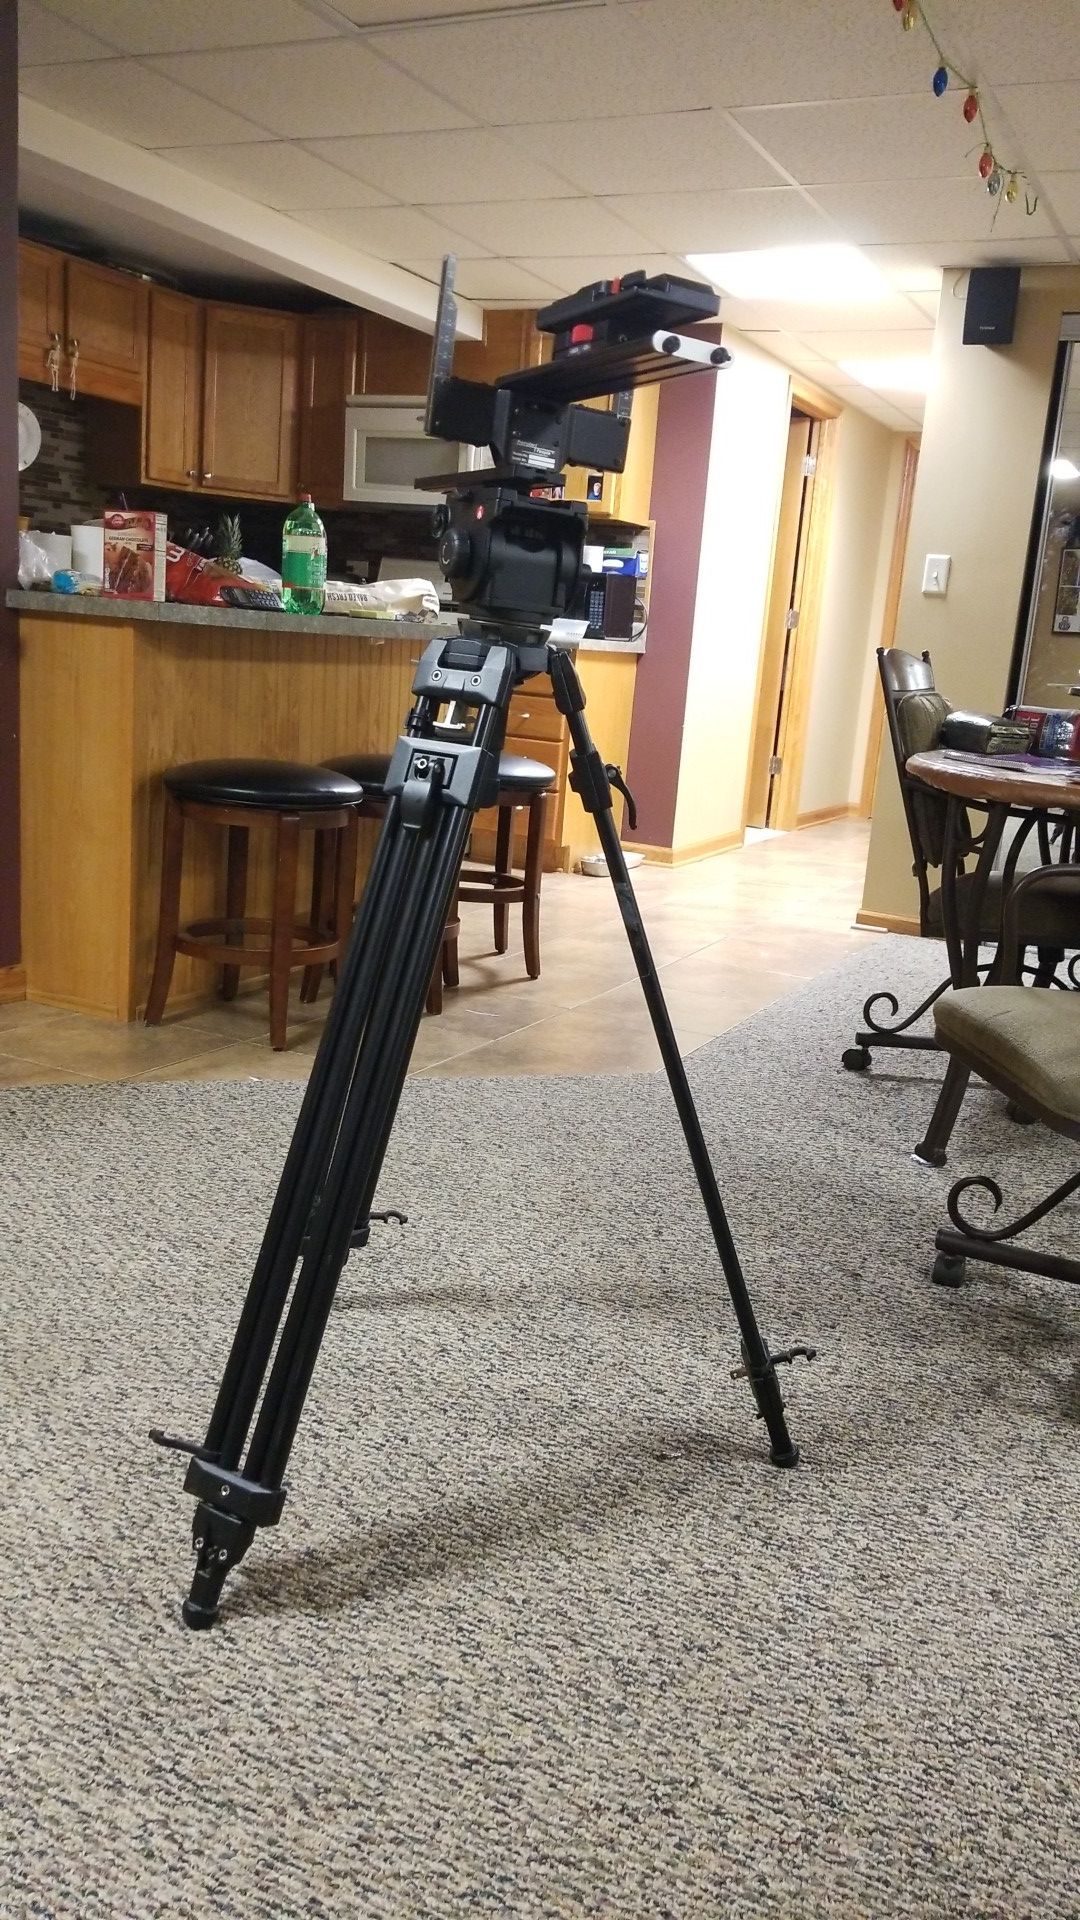 Manfrotto 516 tripod, head, and teleprompter